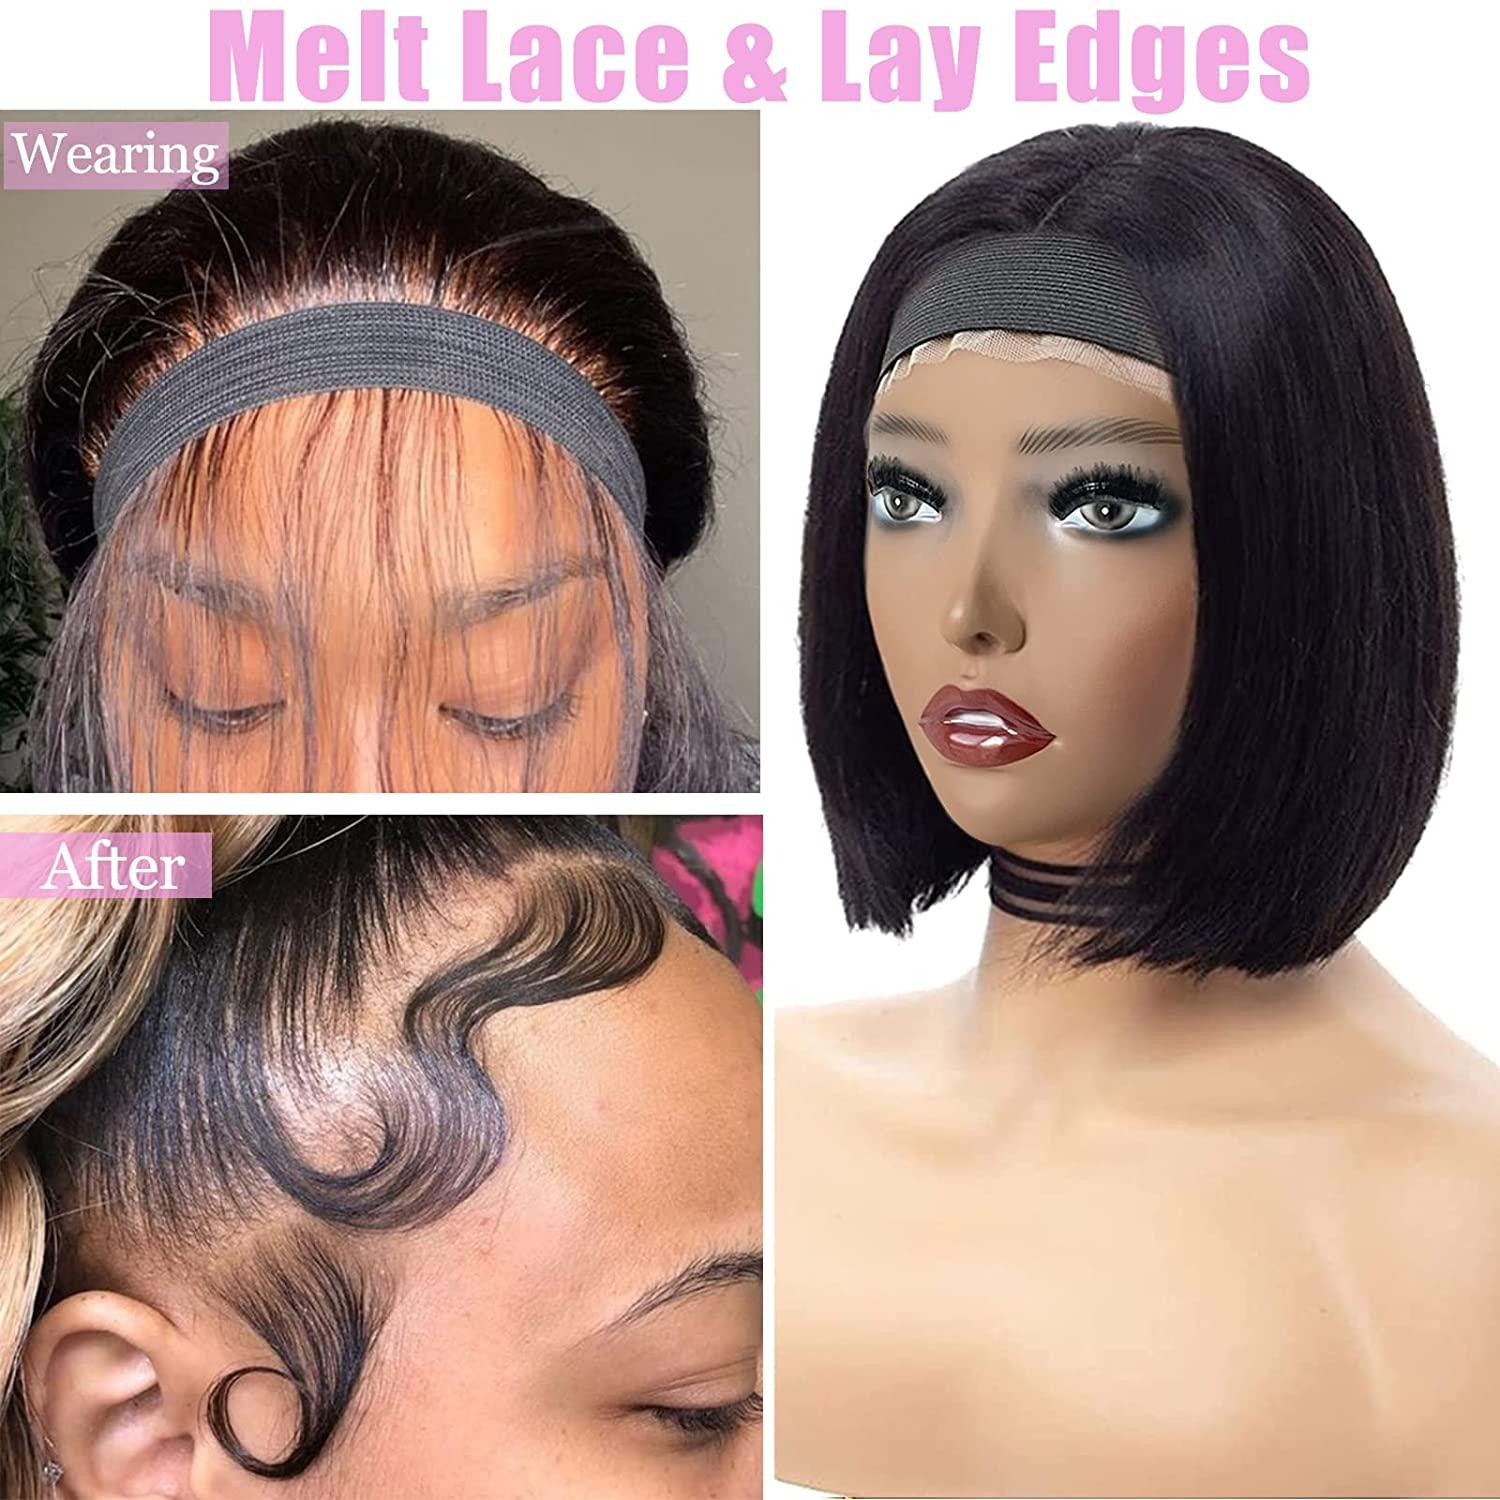  SINGOVE Lace Melting Band,Elastic bands for Wig Edges, Lace Melting  Band for Wigs Edge Wrap to Lay Edges, Wig Band Edge Wrap to Lay  Edges,Elastic Band for Lace Wigs (A) 